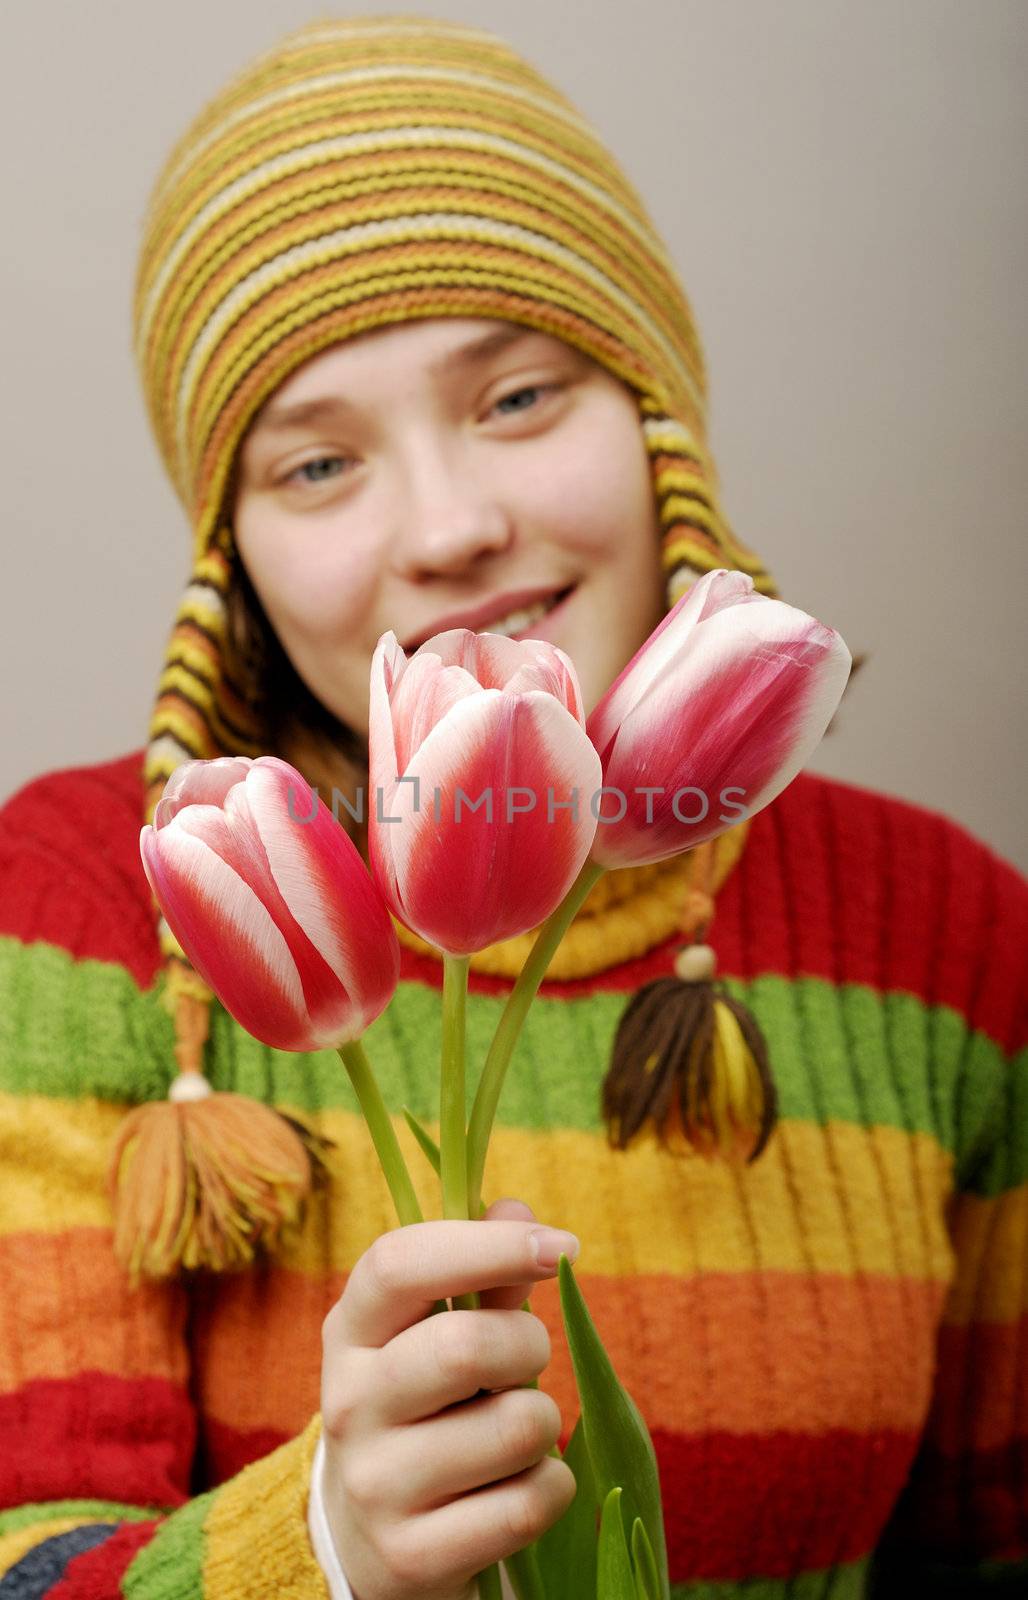 Girl in striped cap with three tulips.